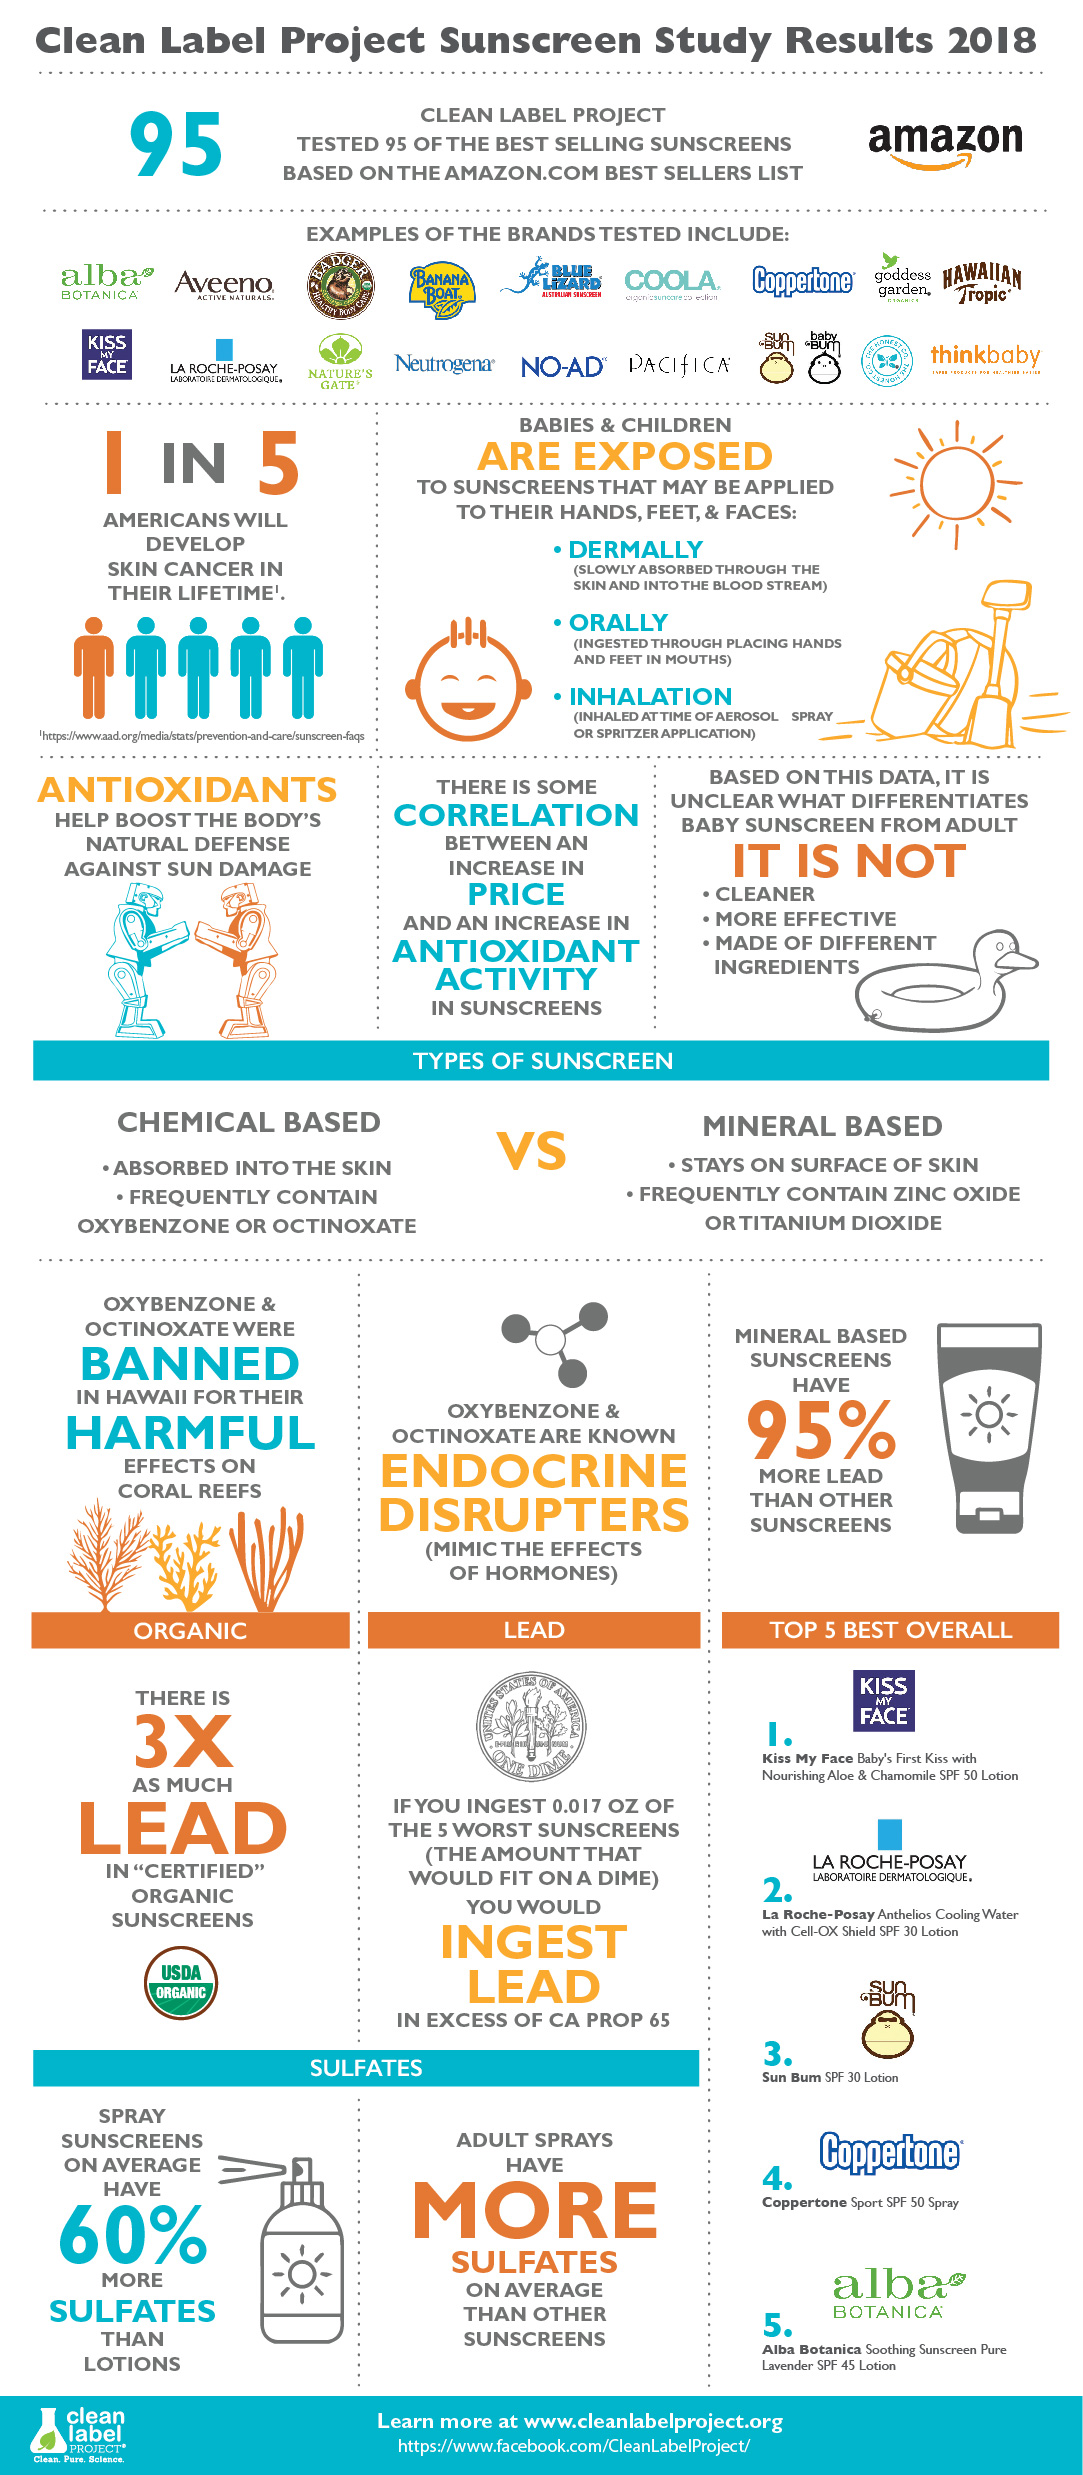 This infographic from the Clean Label Project shows its sunscreen study's major findings.